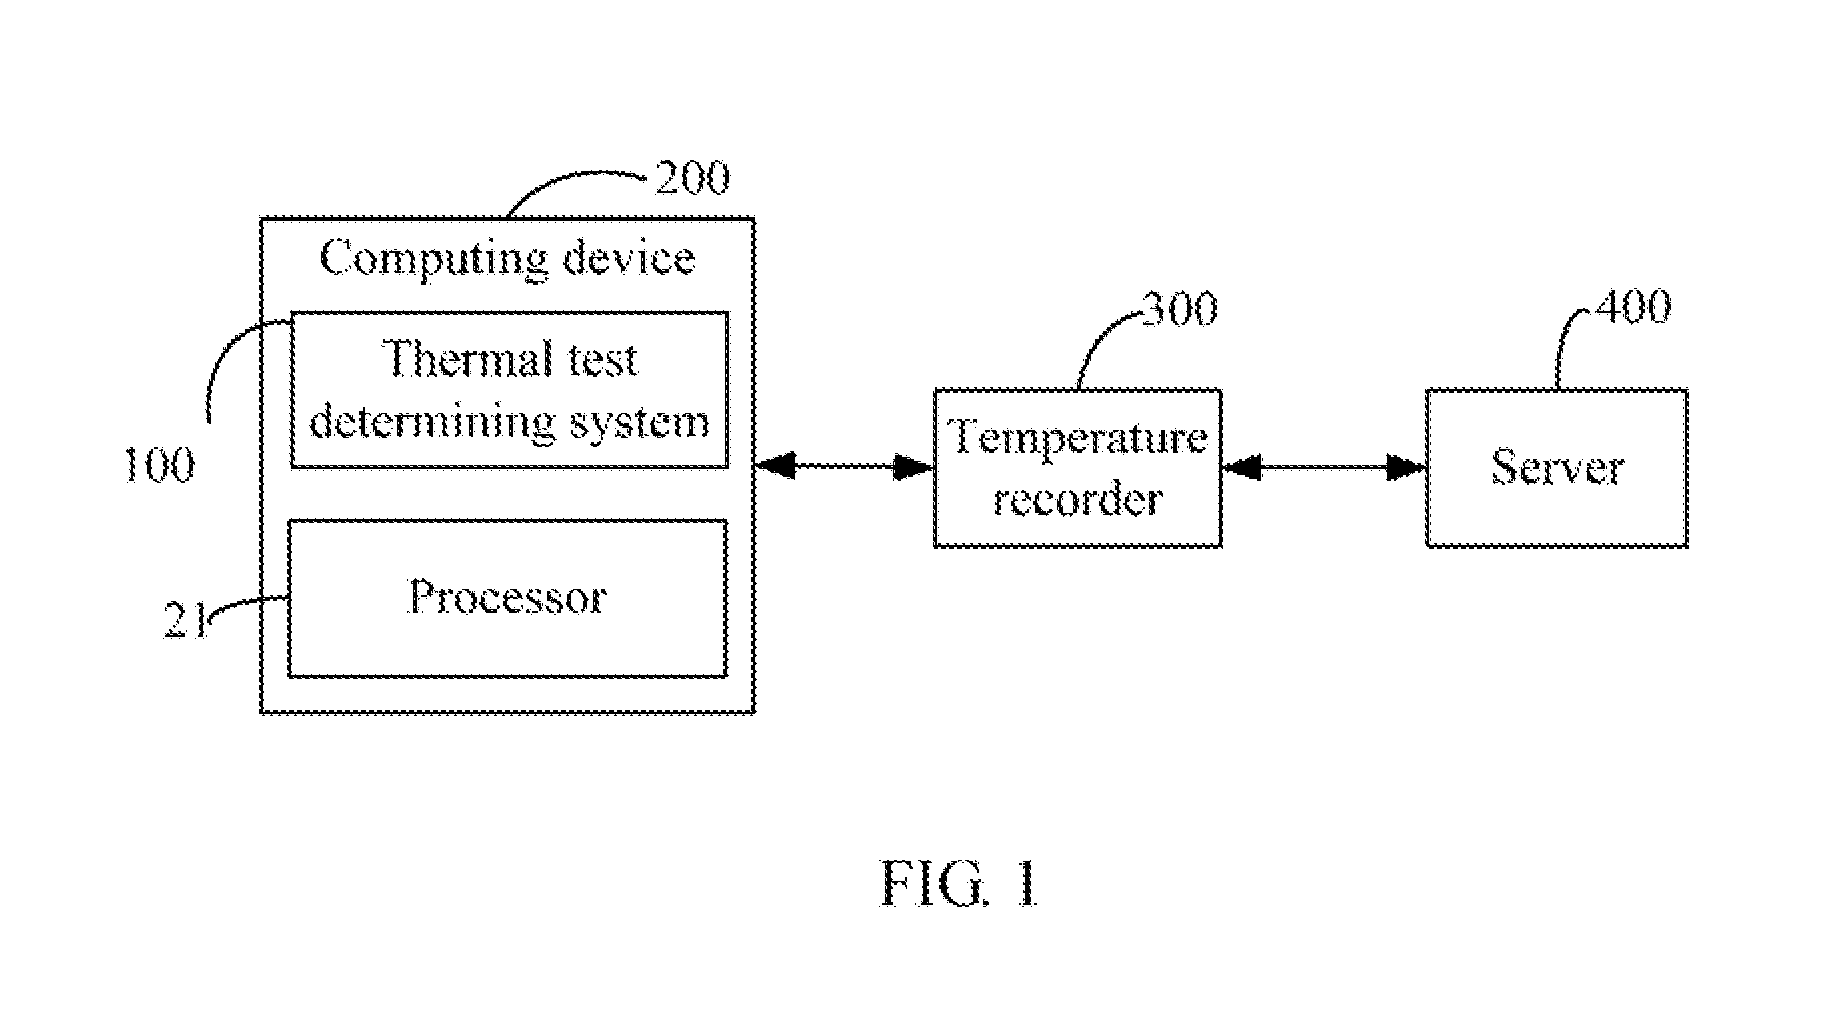 Thermal test determining system and method for server